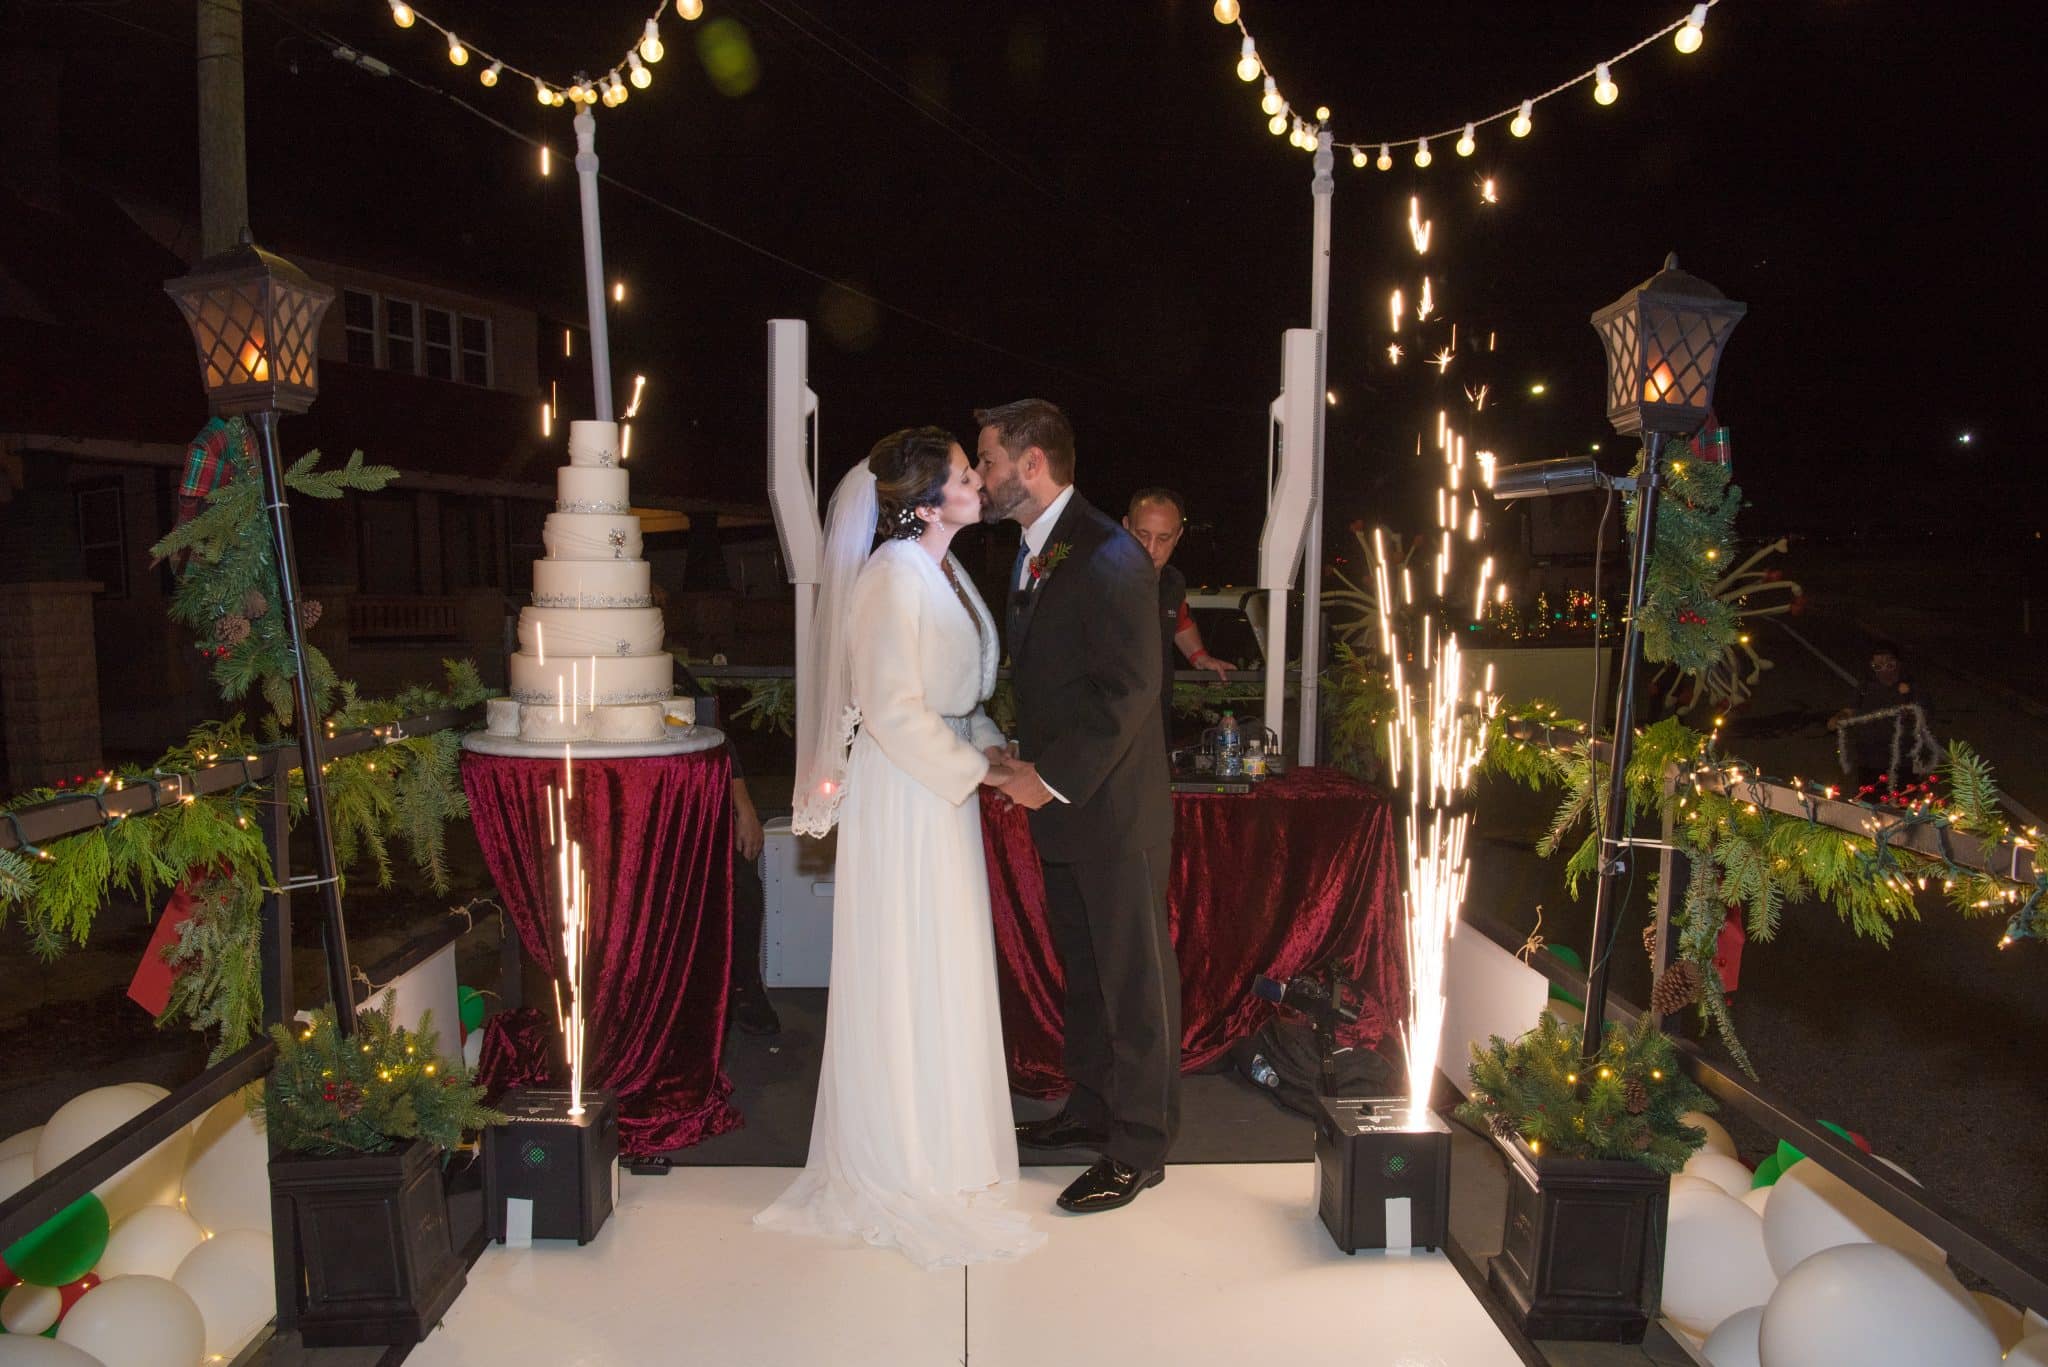 Bride and groom kiss as they stand on a Christmas themed parade float with a white cake and sparks in the background